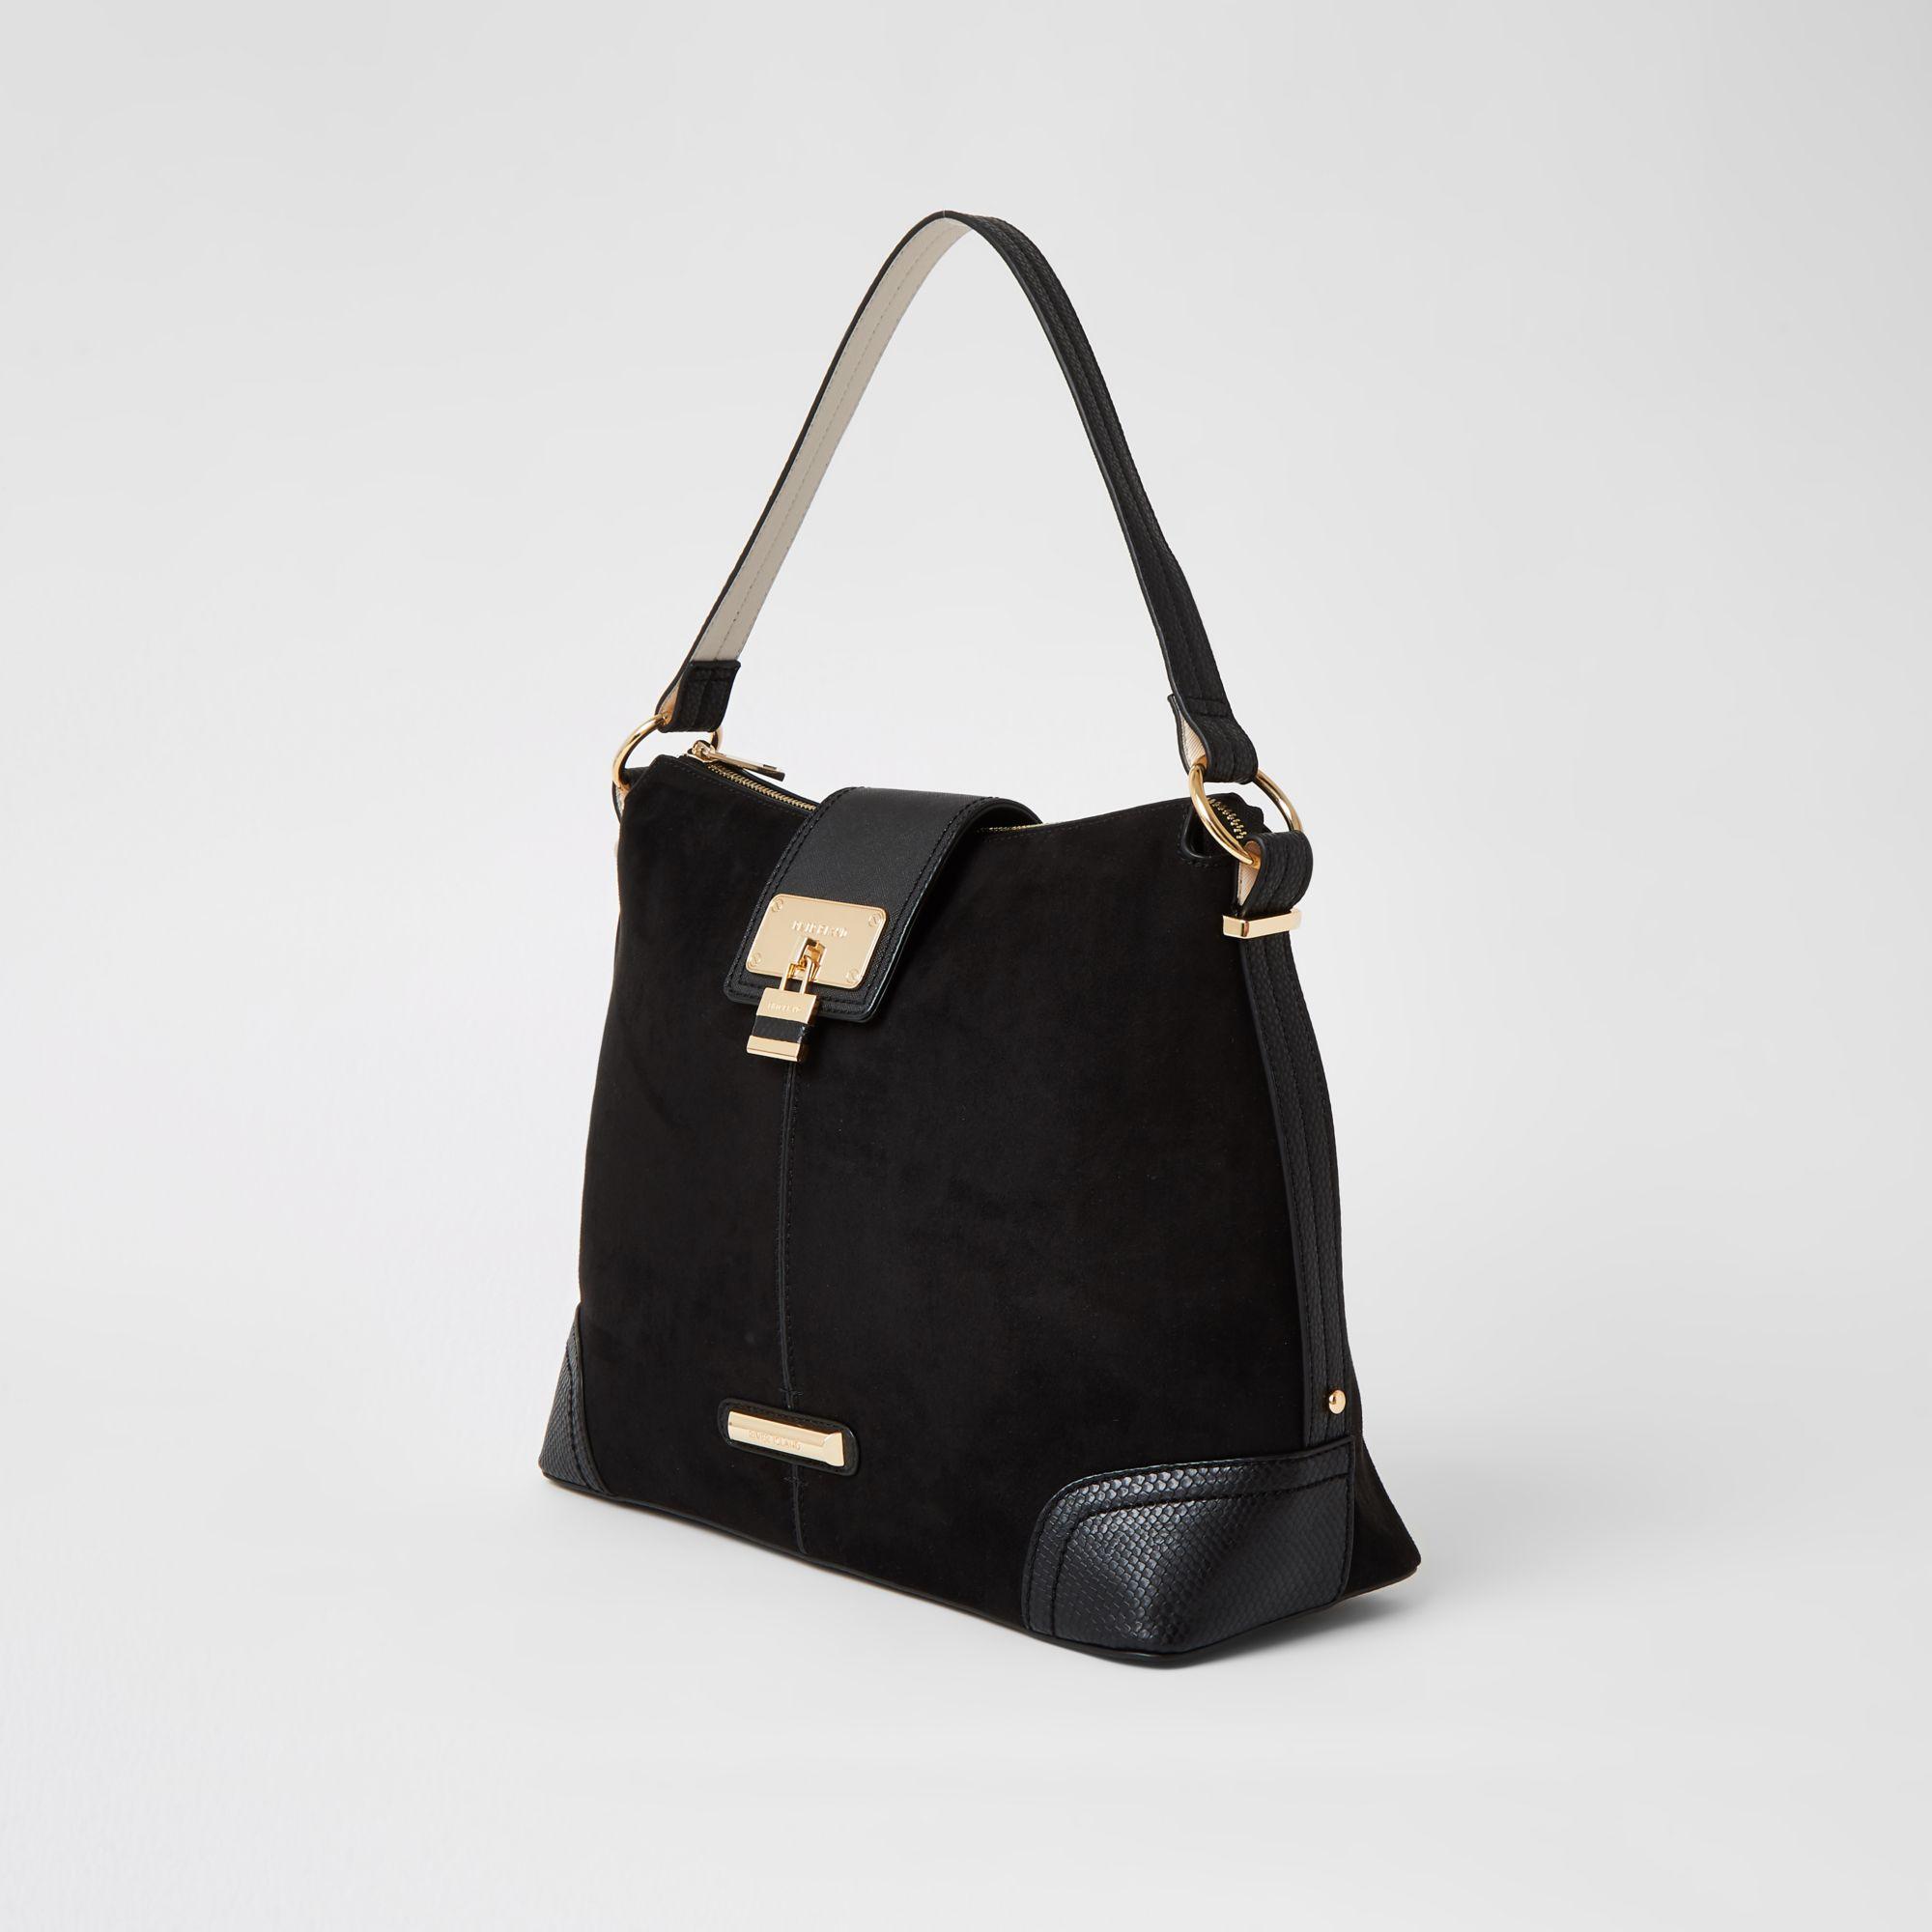 River Island Faux Suede Lock Front Slouch Bag in Black - Lyst